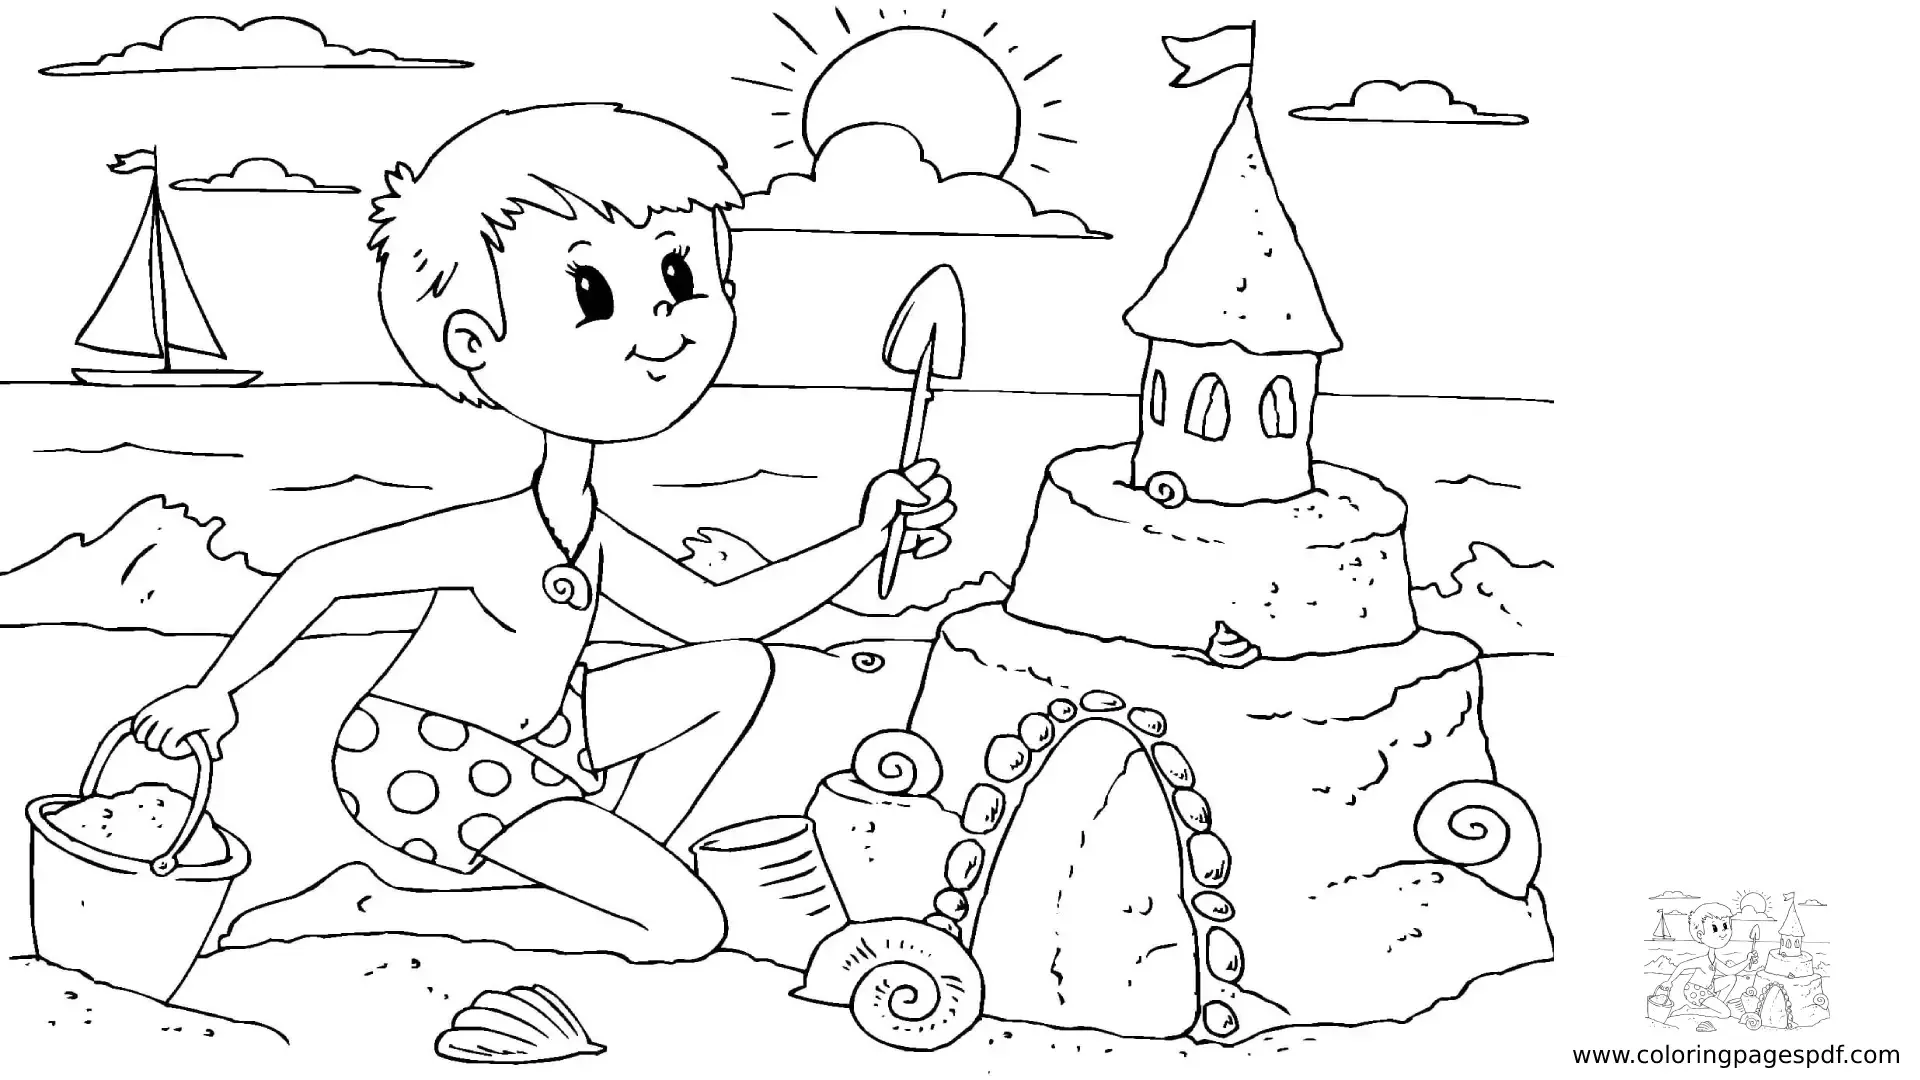 Coloring Pages Of A Boy Making A SandCastle